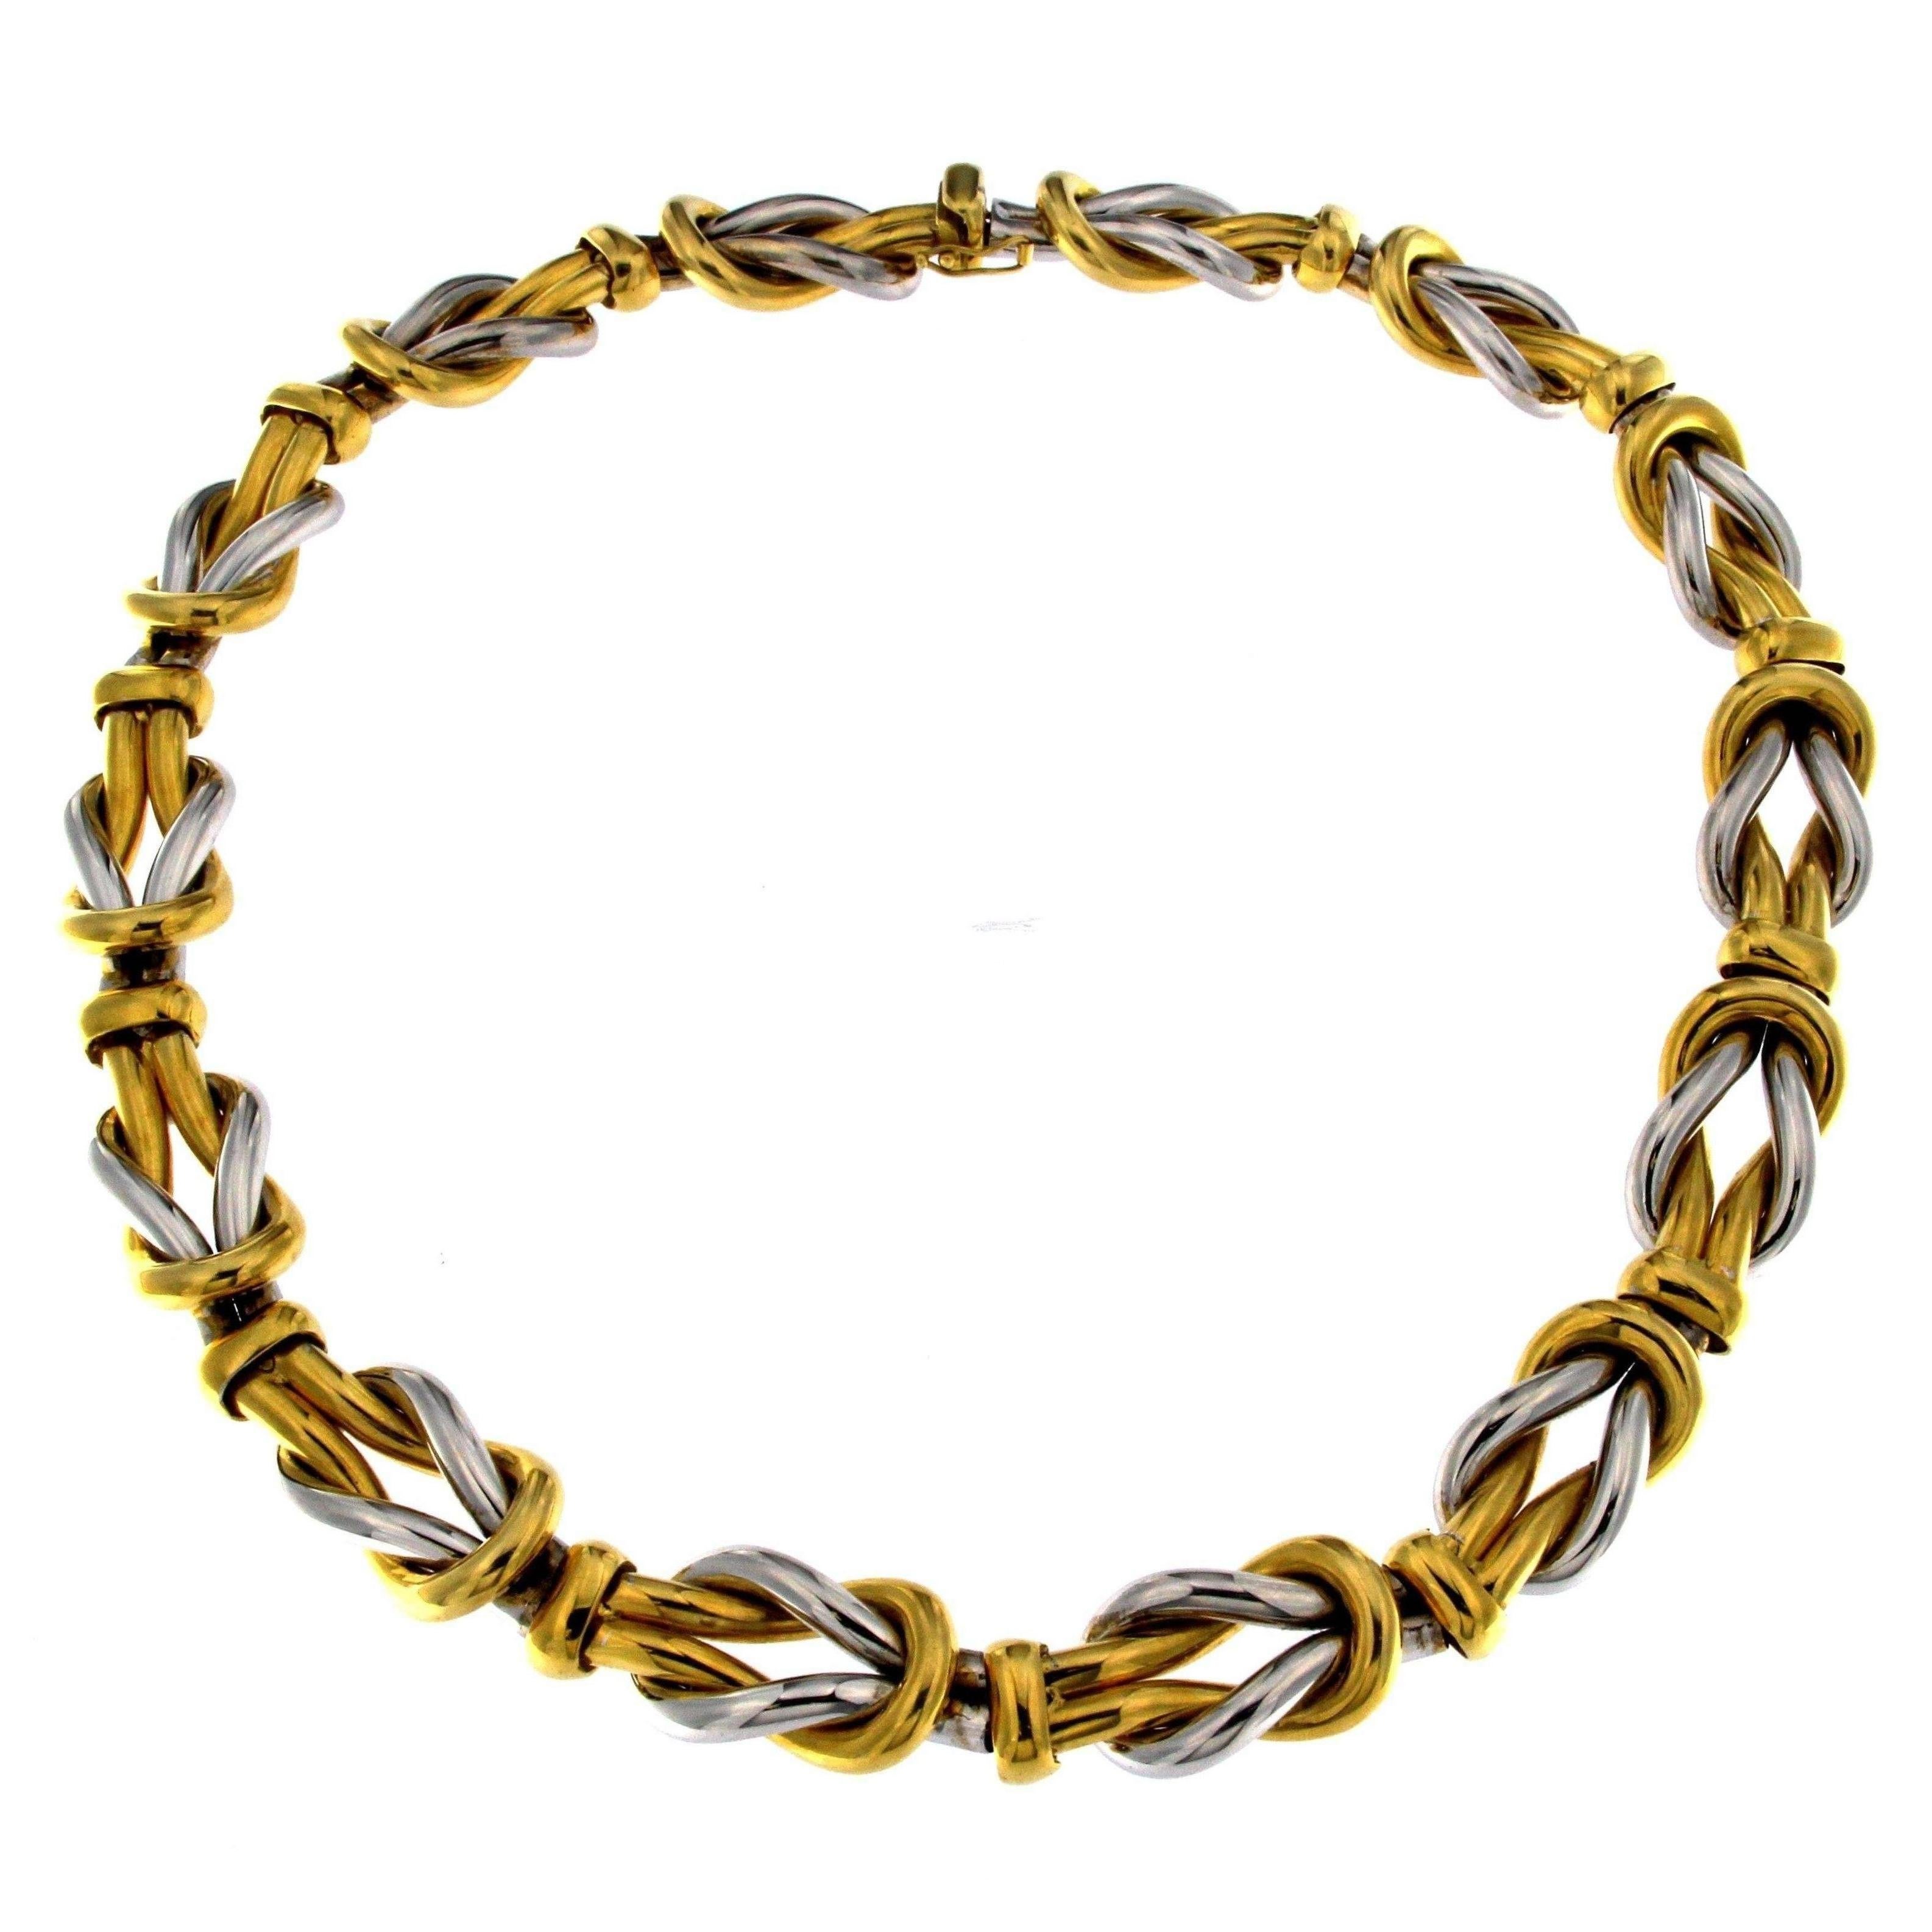 the alternation of yellow gold and white gold in the succession of knots of great value to the desing of this necklace suitable for a sports dress code but also for special occasions
The total weight of the gold is GR 116.90

